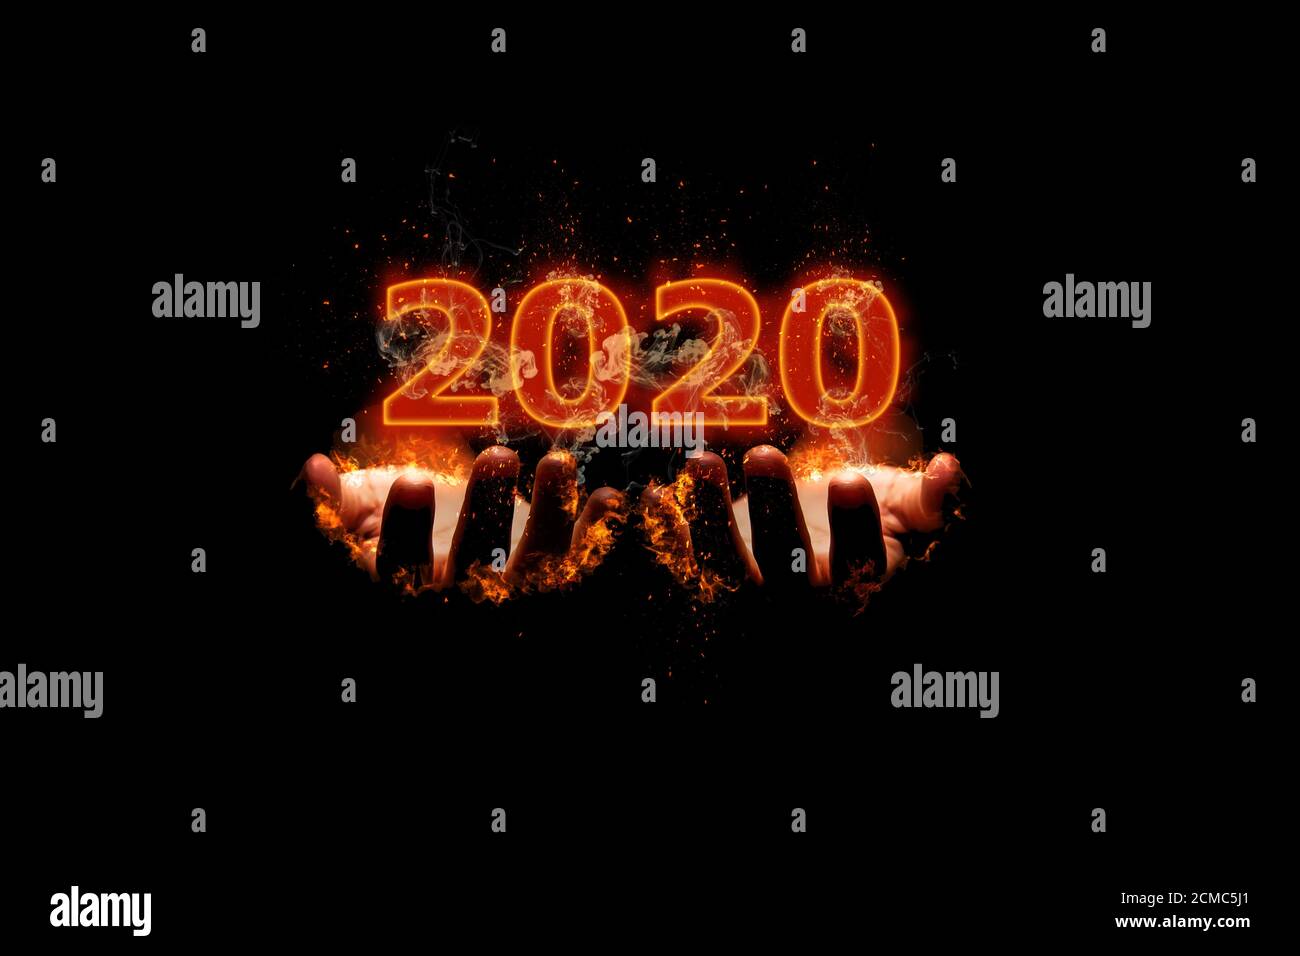 New Year concept 2020 design with fire on the fire was burning hands. Stock Photo